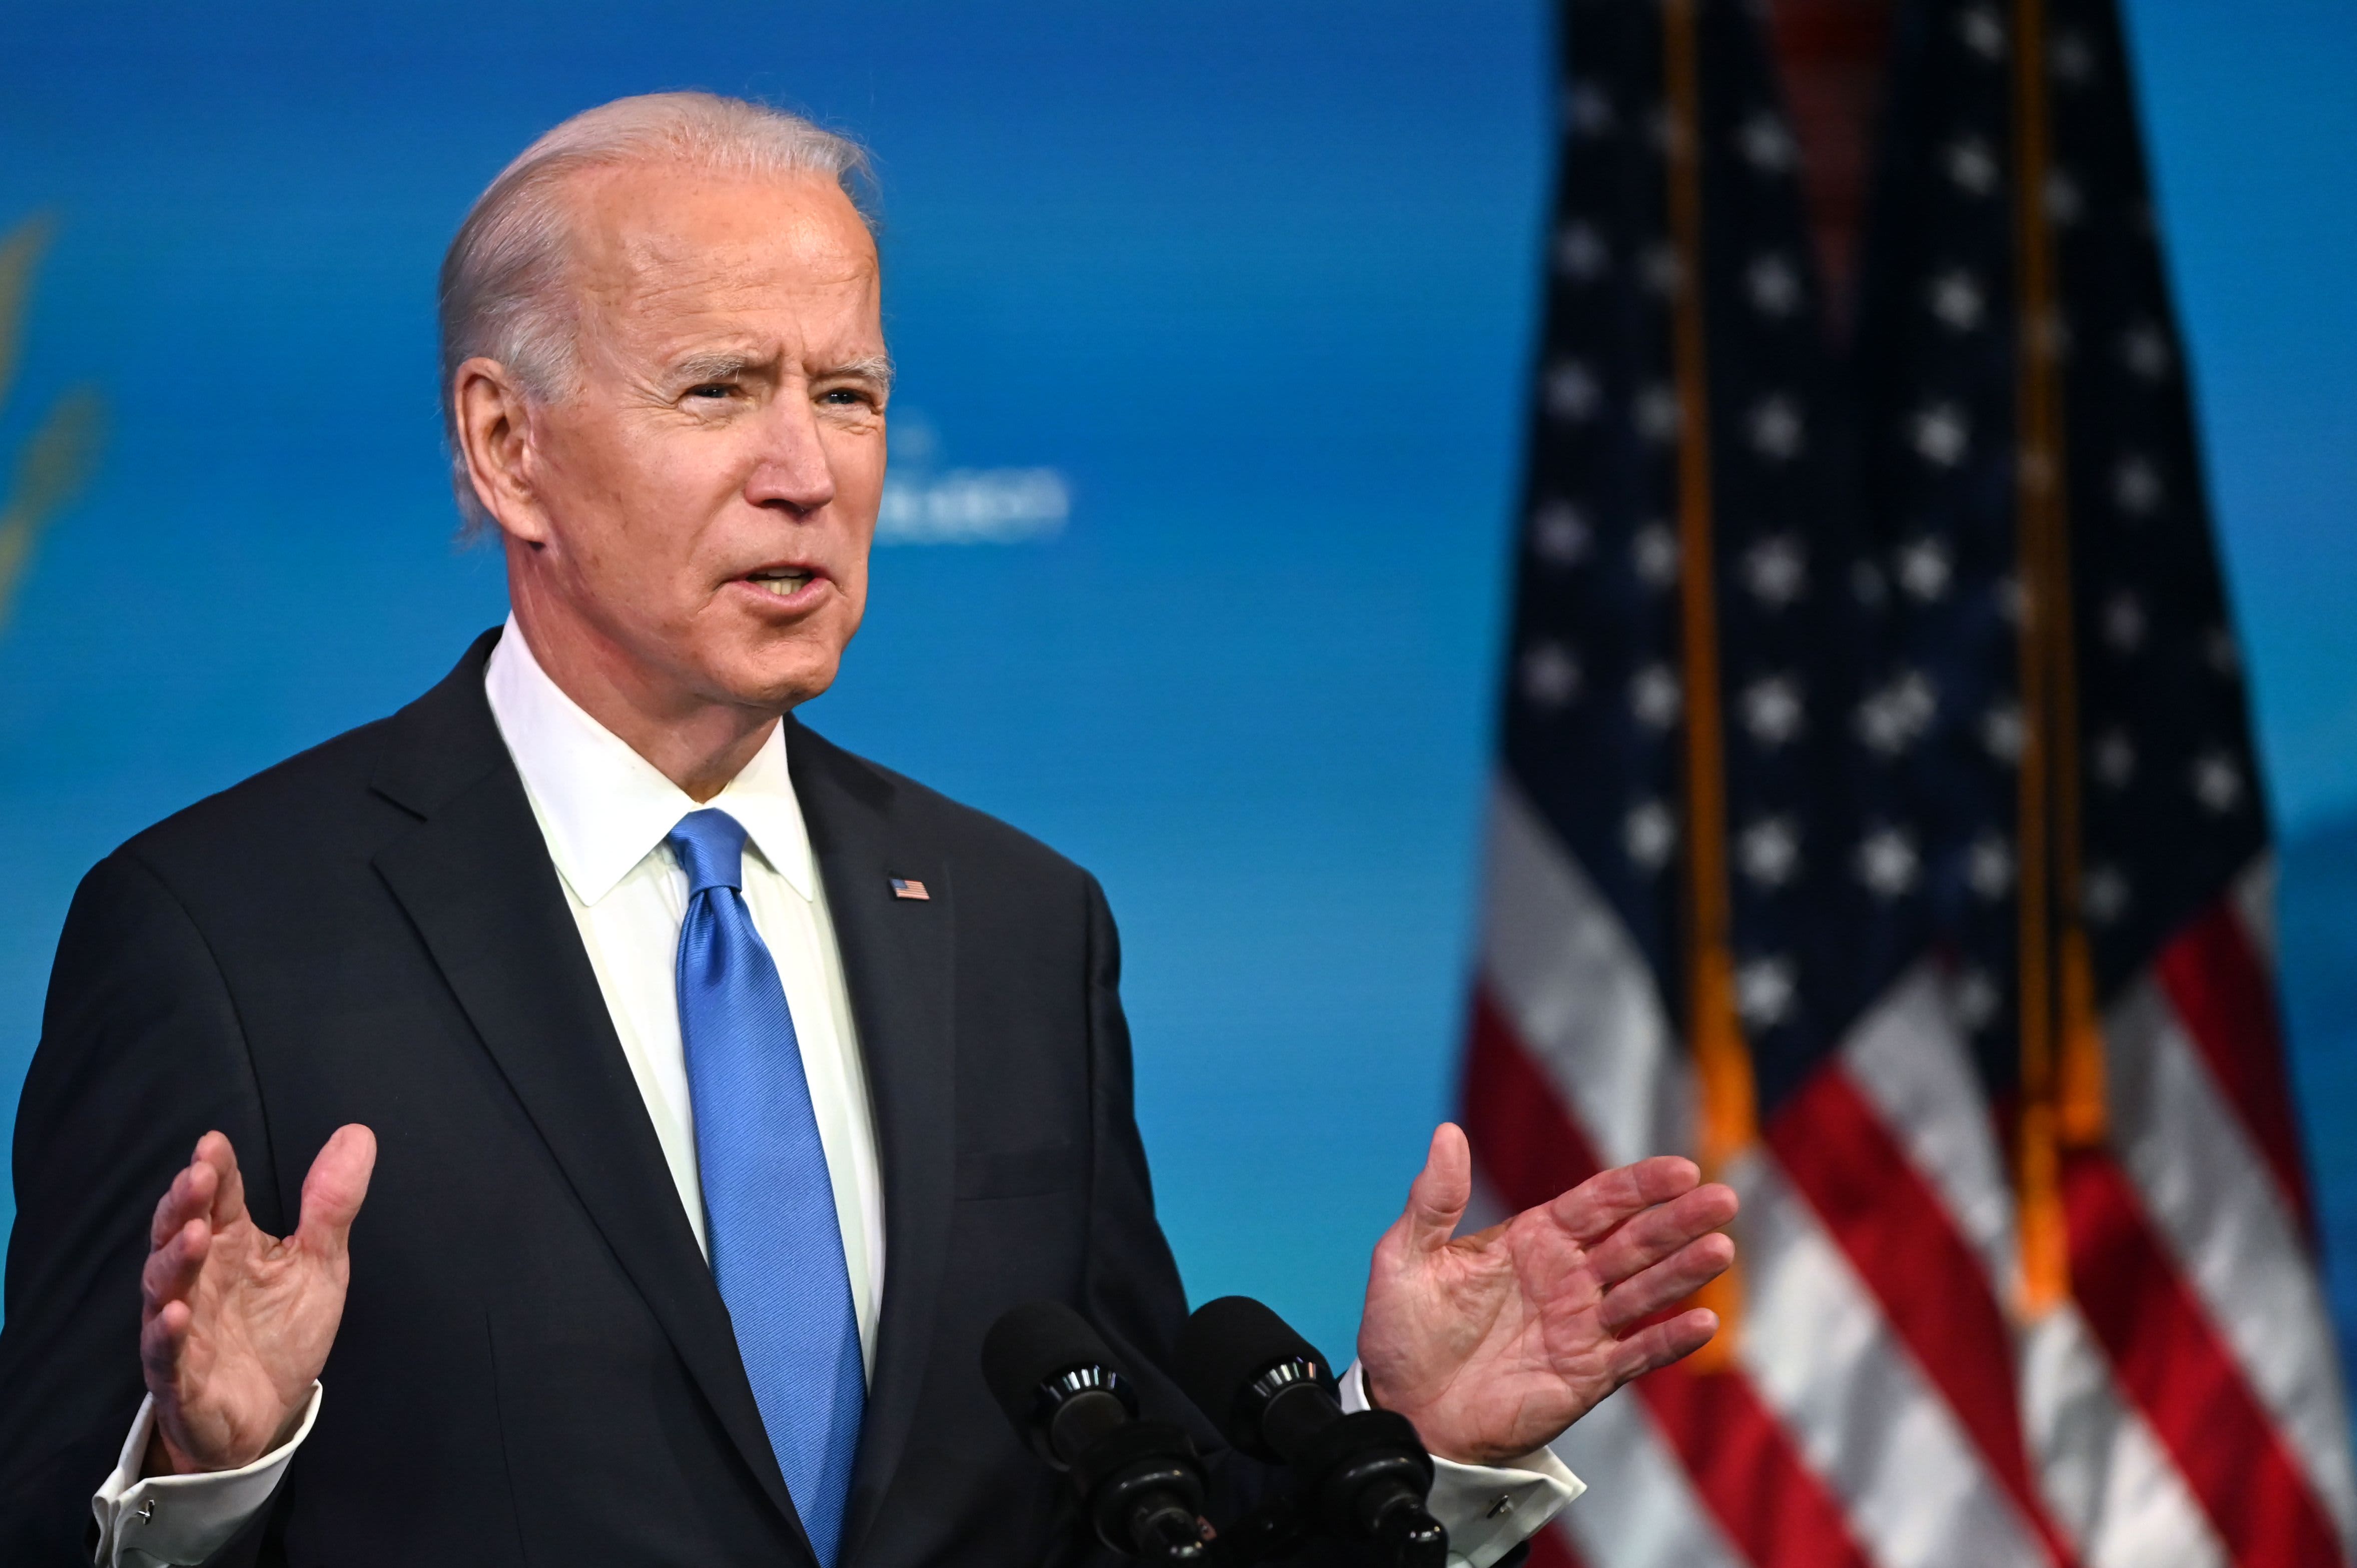 How Biden Will Approach America’s Battle With China Over Technology